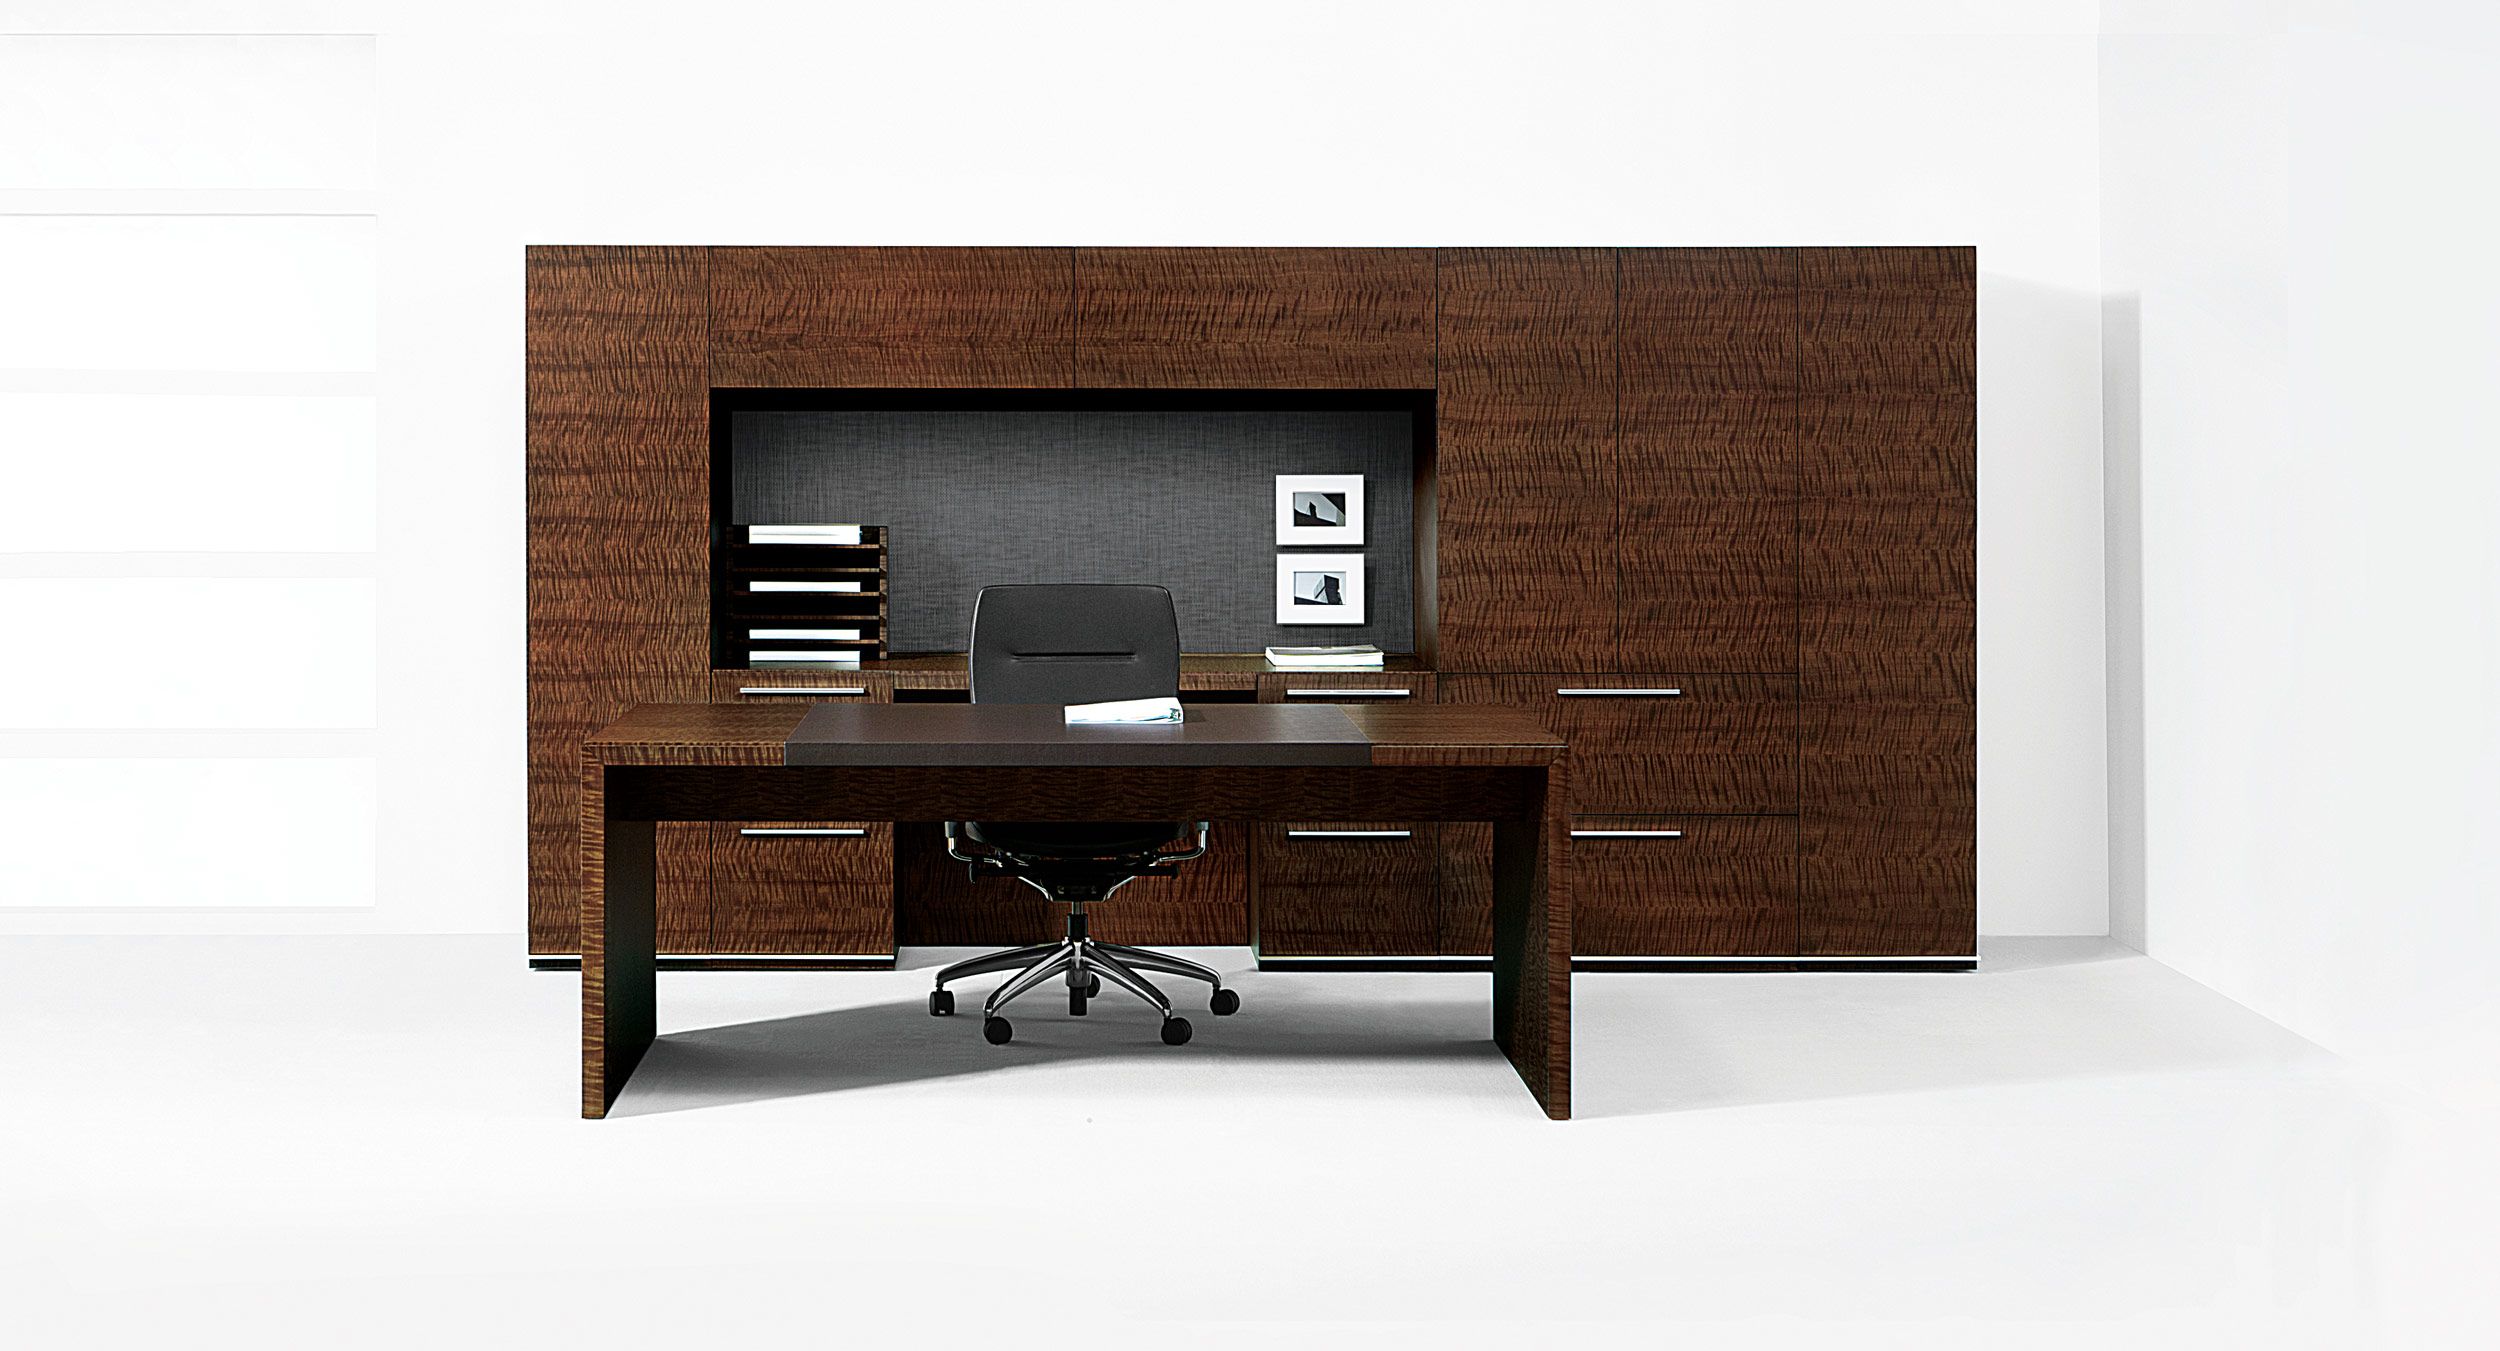 Freestanding desks pair perfectly with minimalist Mitre workwalls.